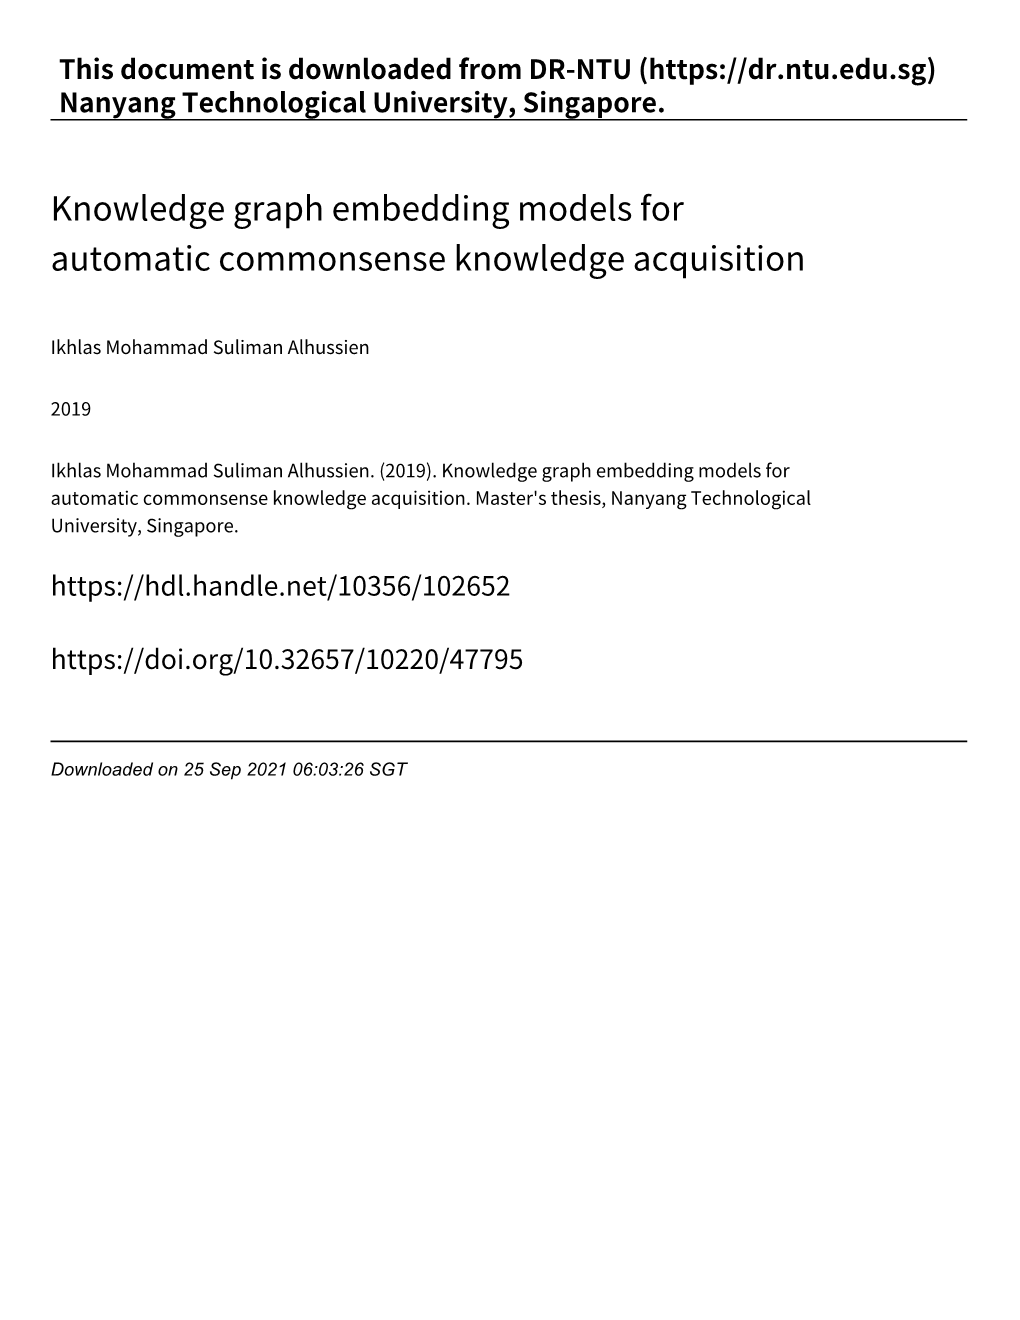 Knowledge Graph Embedding Models for Automatic Commonsense Knowledge Acquisition